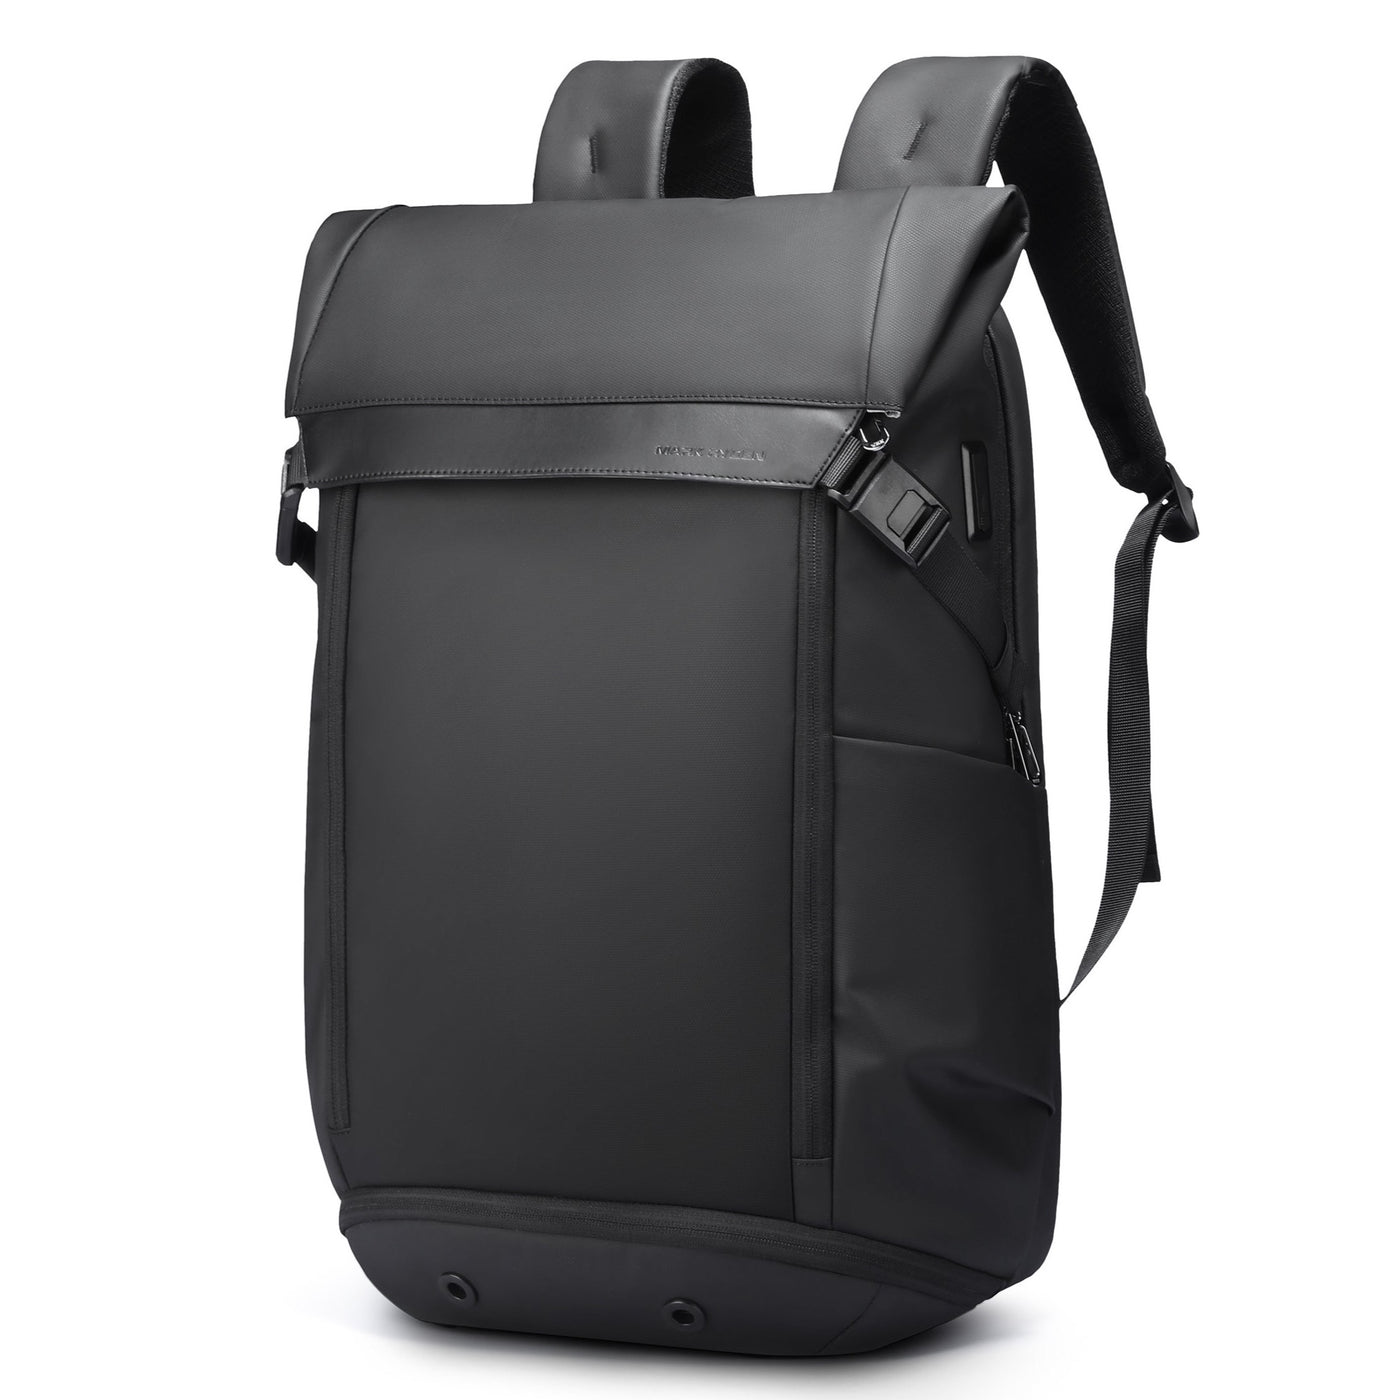 Mark Ryden Unit daily commuter laptop backpack with usb charging